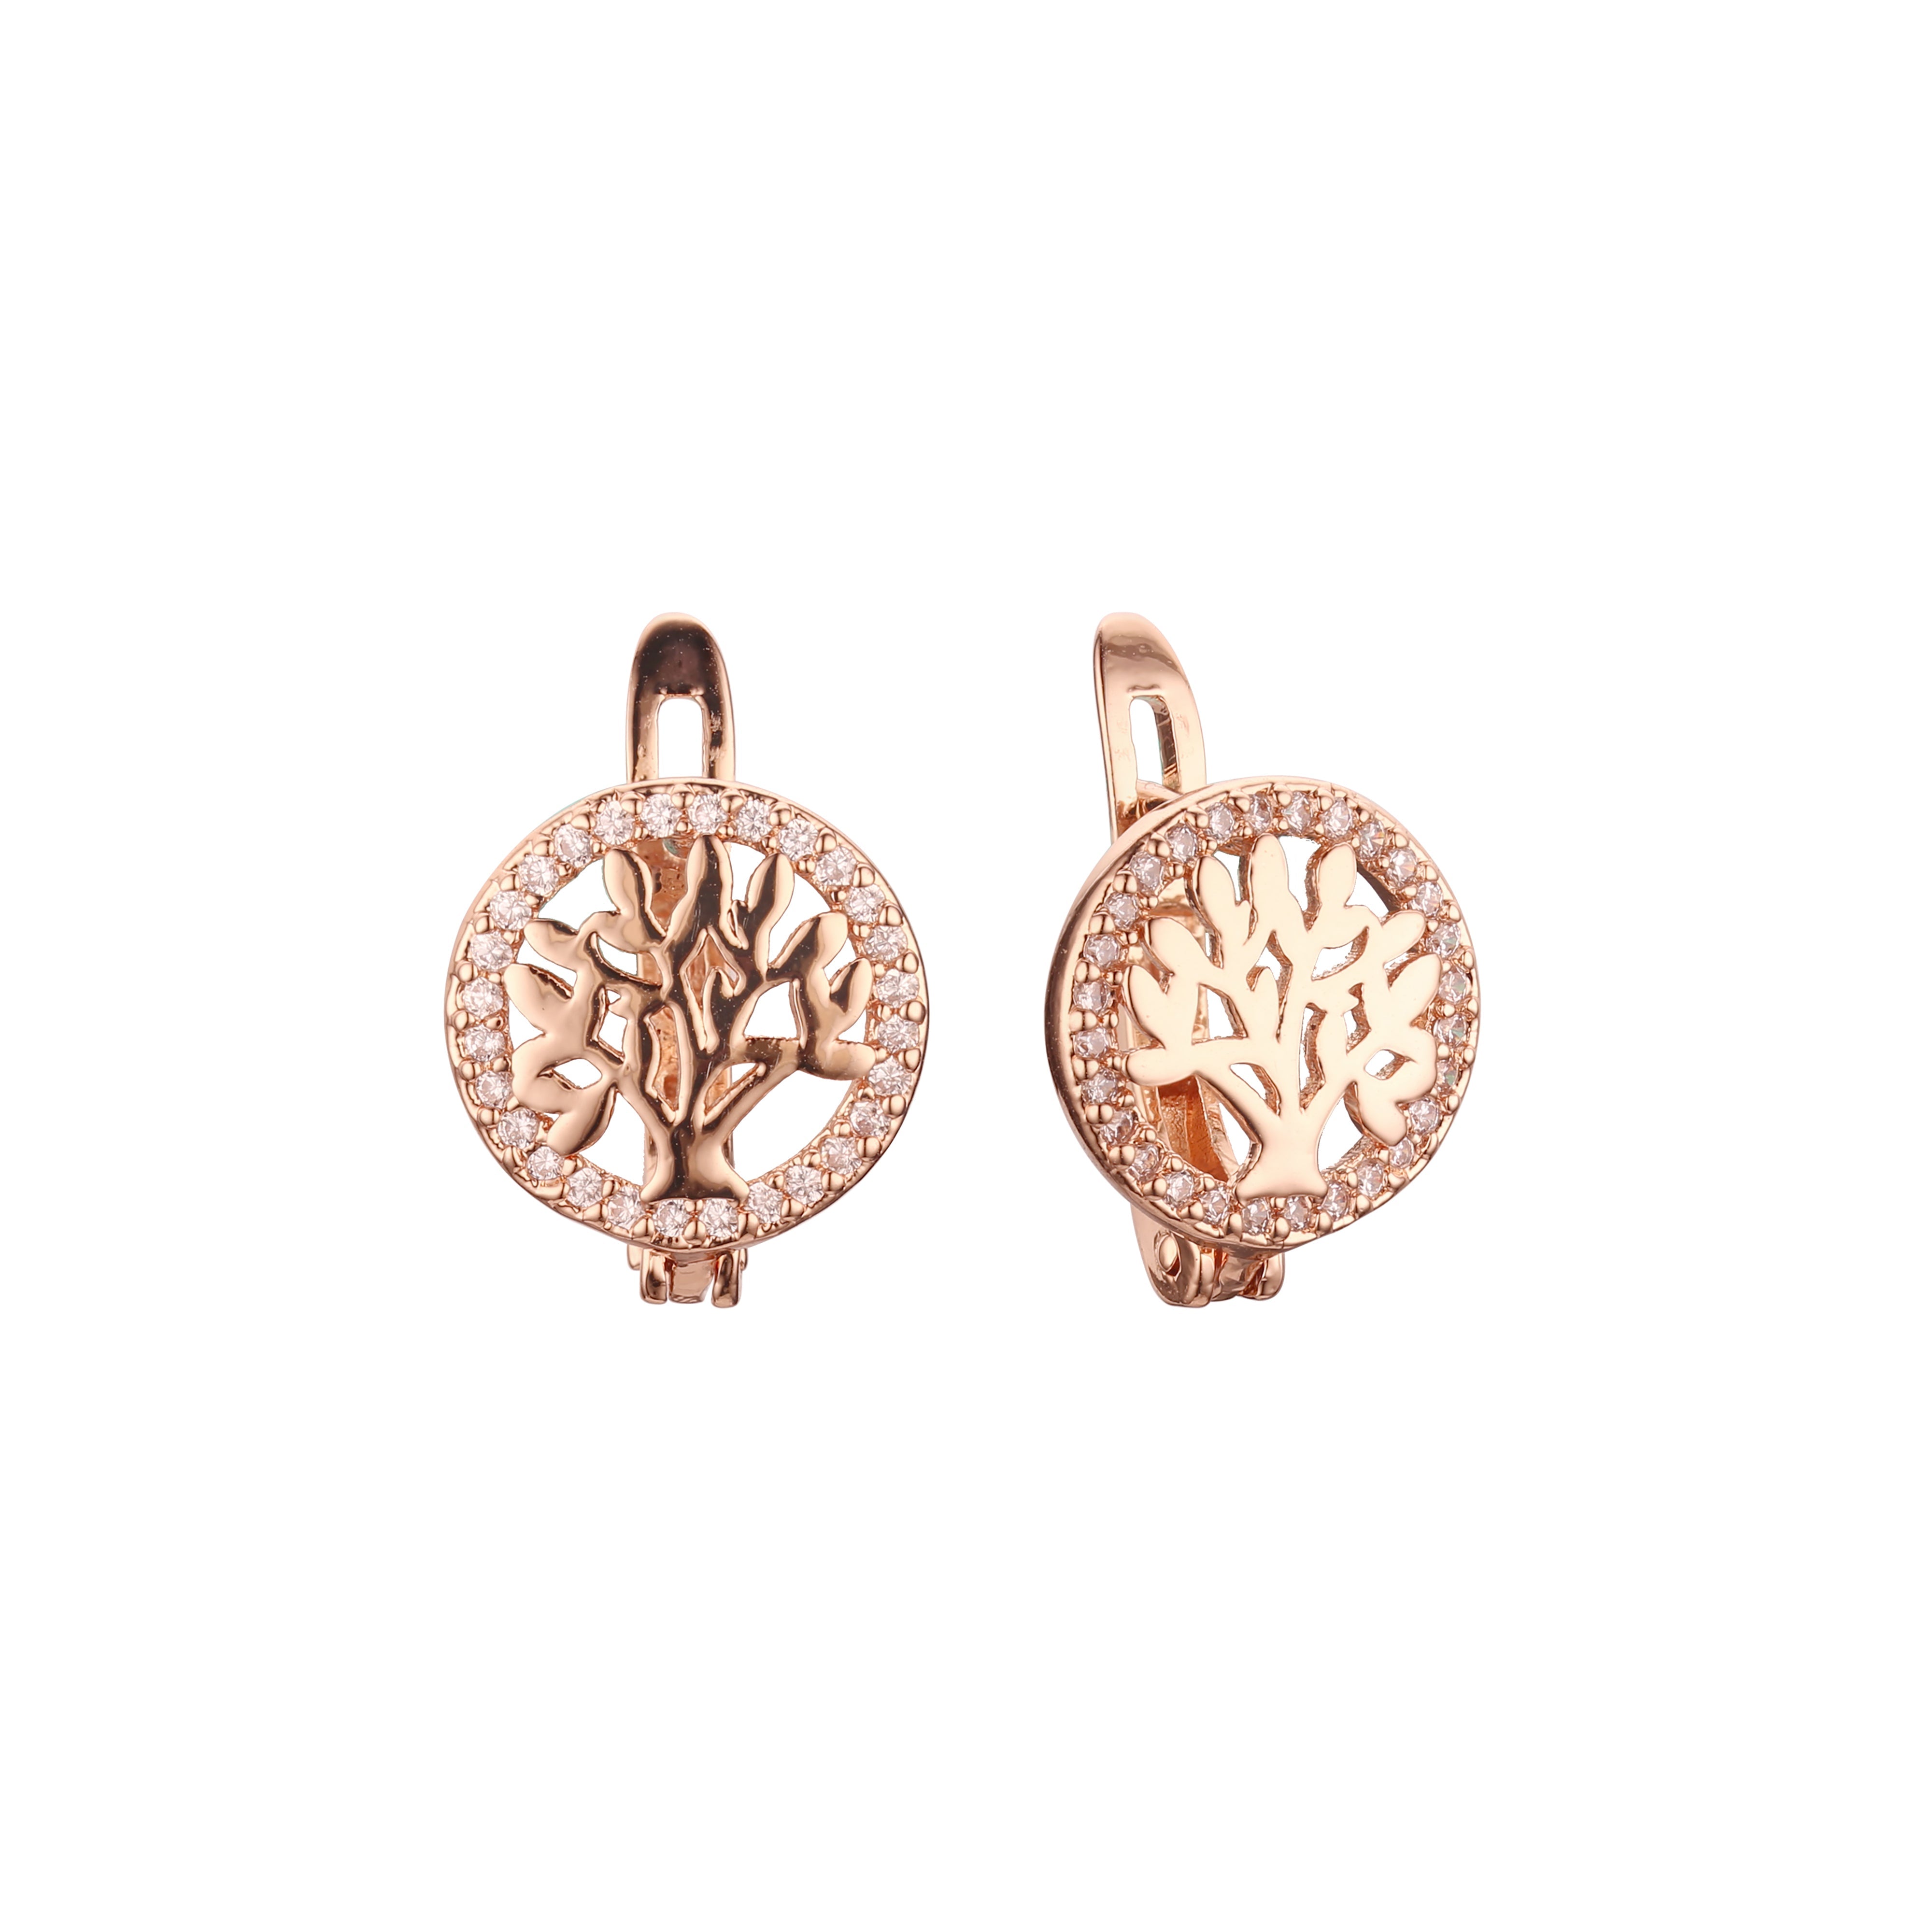 Halo tree and leaves earrings in 14K Gold, Rose Gold plating colors